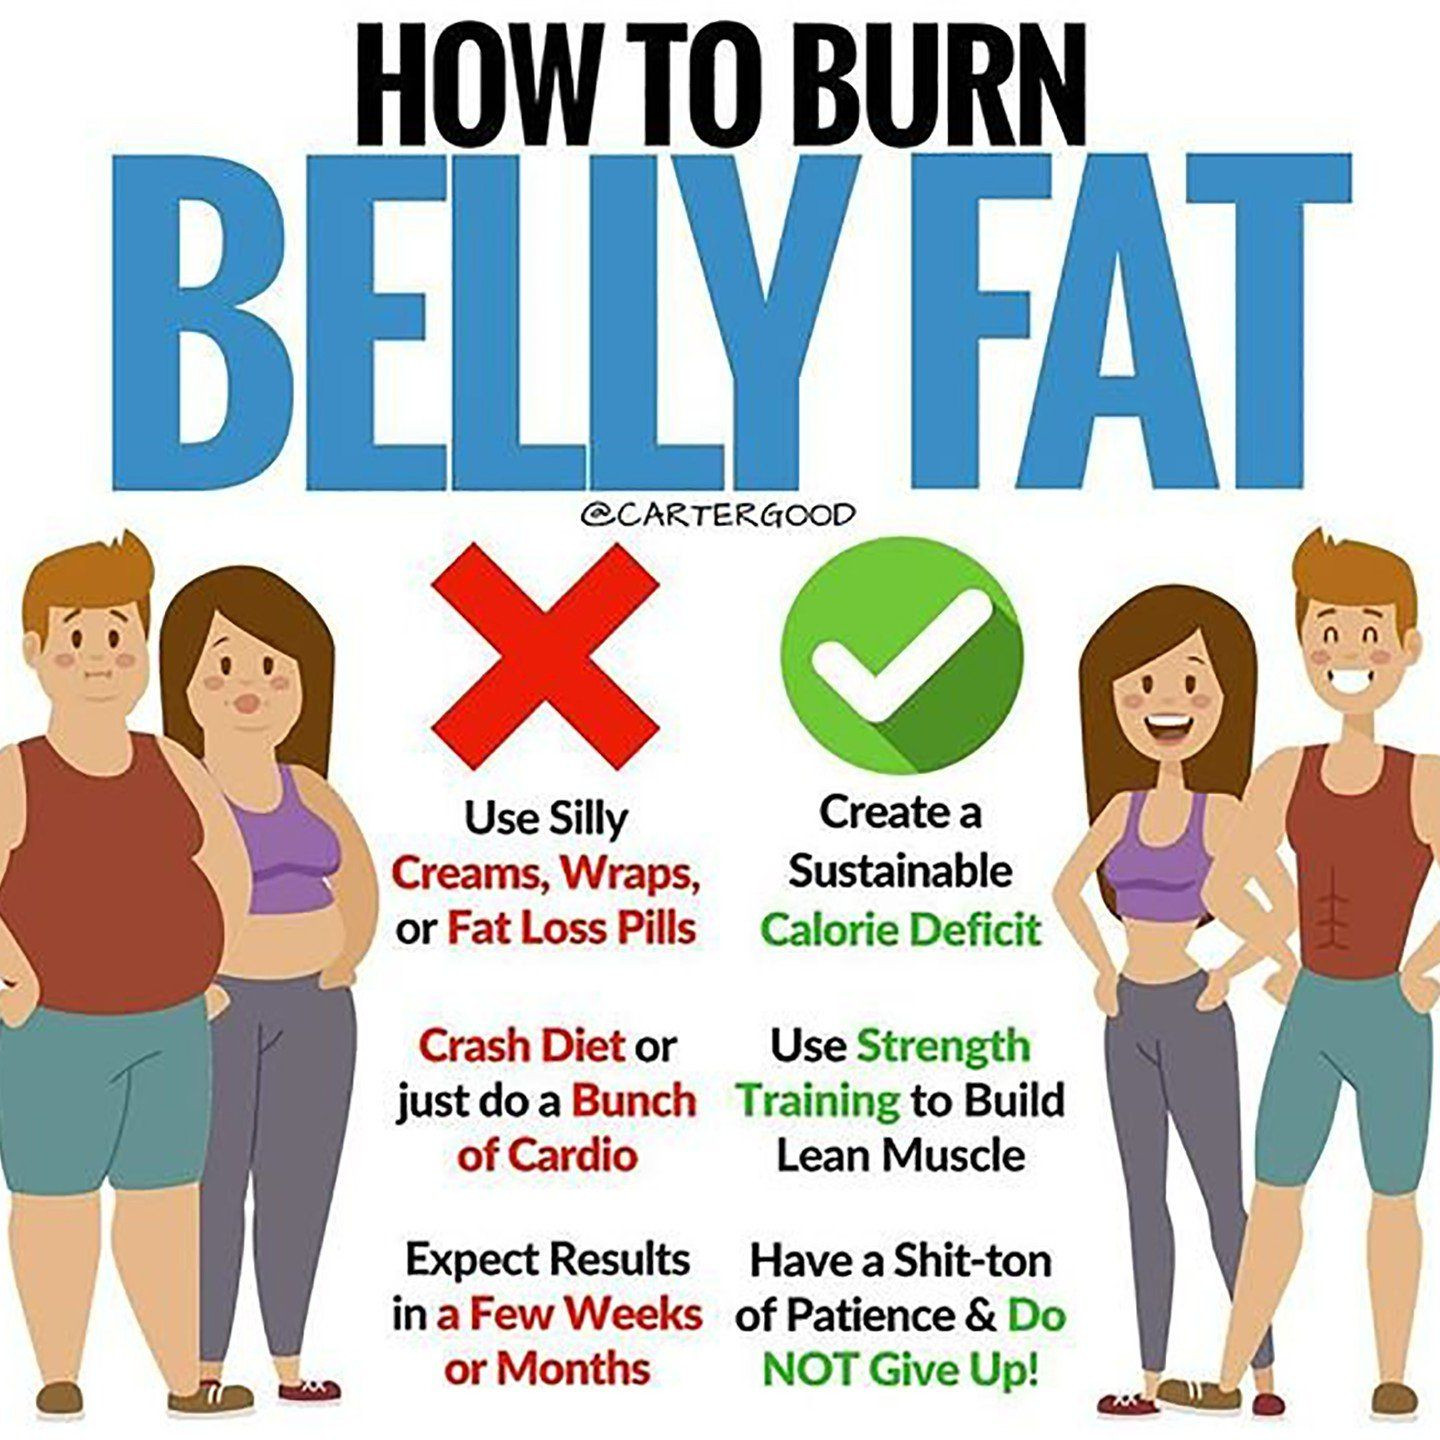 Burn Belly Fat Fast Videos
 A Fat Loss Coach Says to Do These 3 Things to Burn Belly